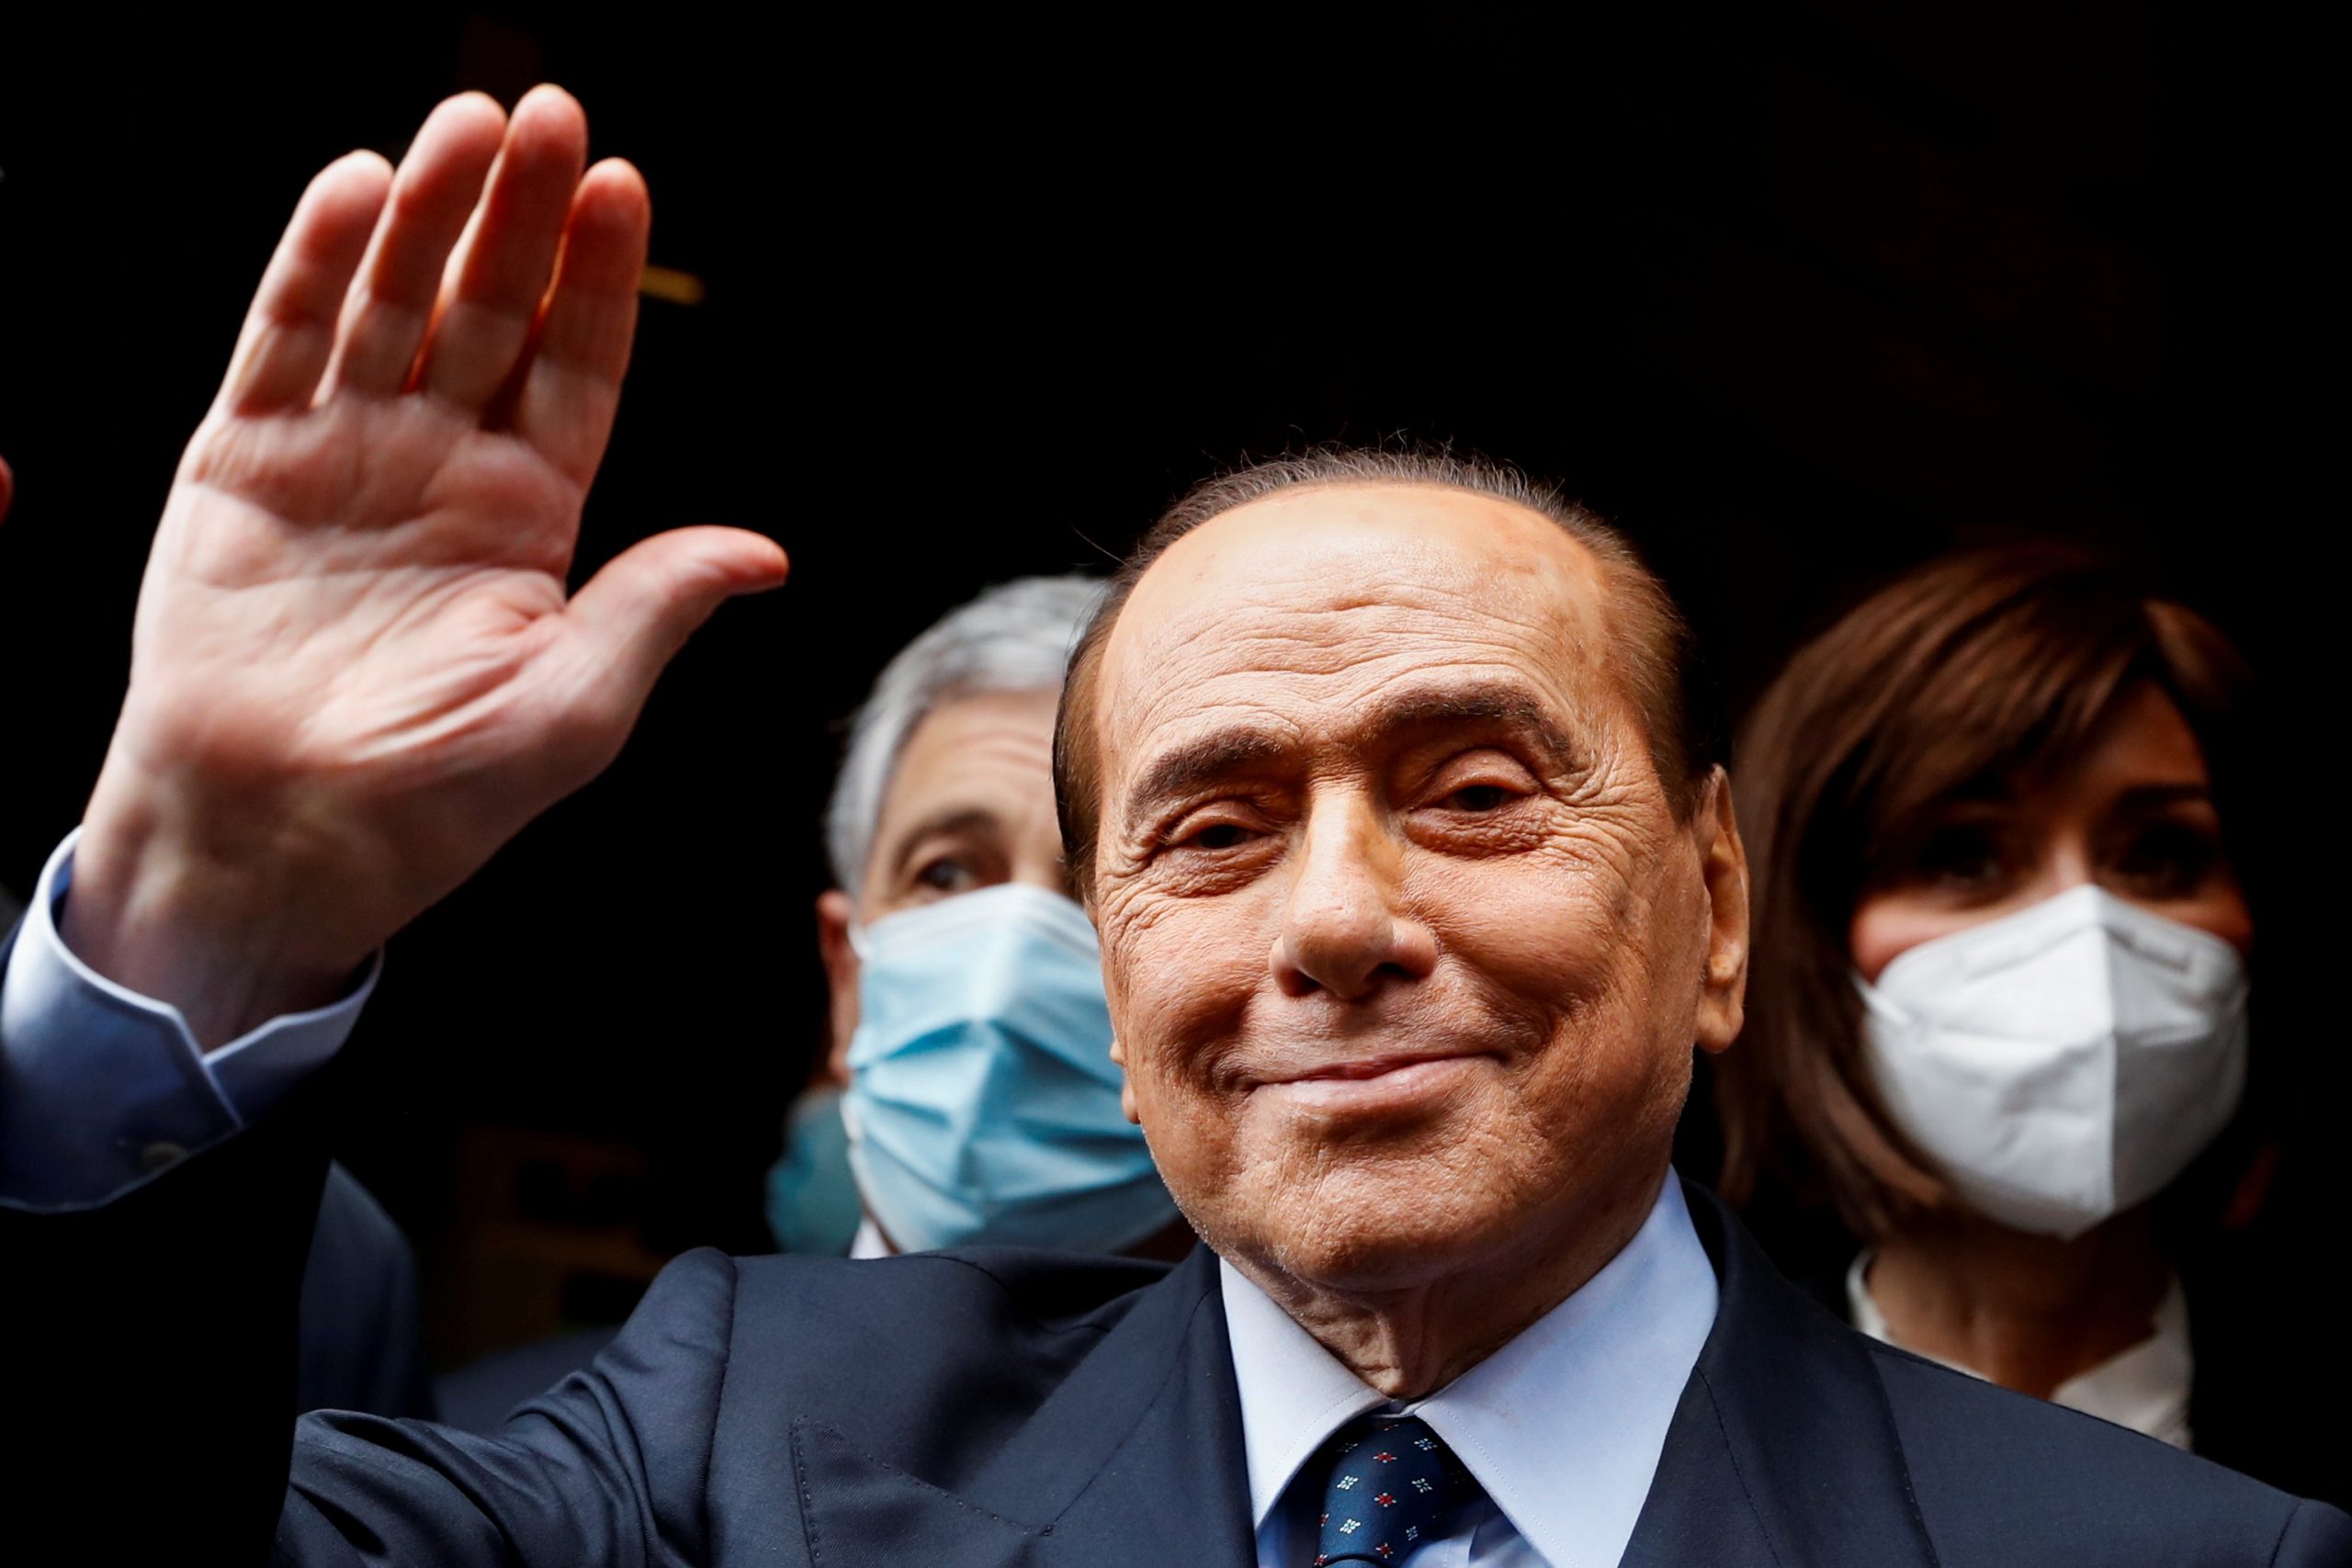 FILE PHOTO: Berlusconi arrives at Montecitorio Palace for talks on forming a new government, in Rome FILE PHOTO: Italy's former Prime Minister Silvio Berlusconi waves as he arrives at Montecitorio Palace for talks on forming a new government, in Rome, Italy, February 9, 2021. REUTERS/Yara Nardi/File Photo YARA NARDI